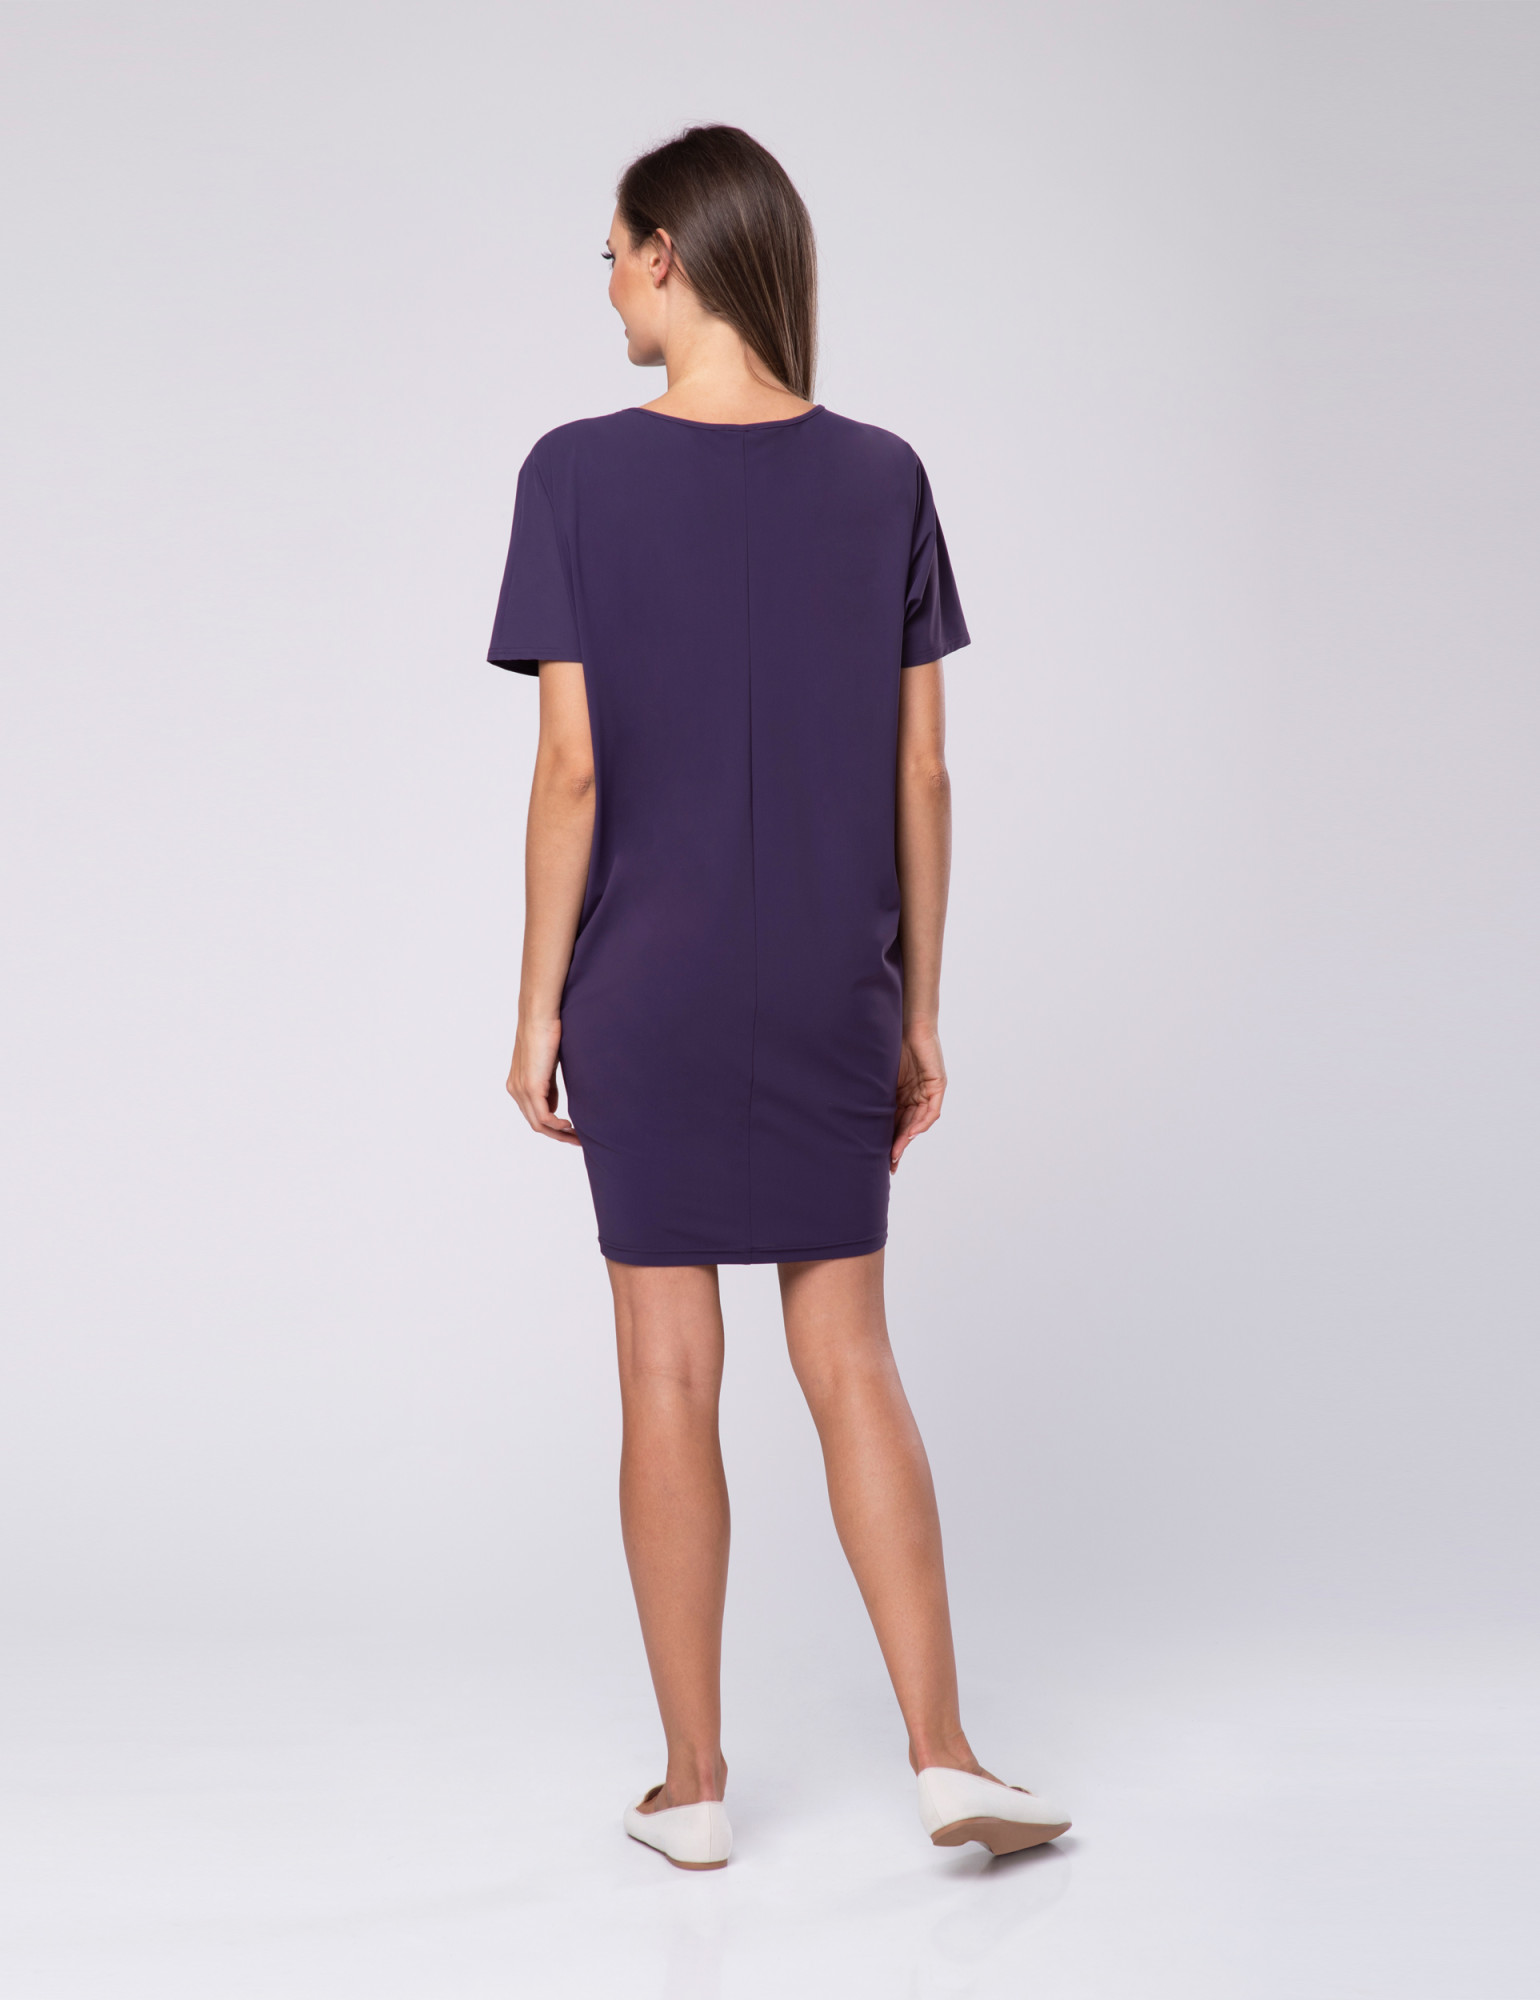 Look Made With Love Šaty 515 Capri Violet S/M